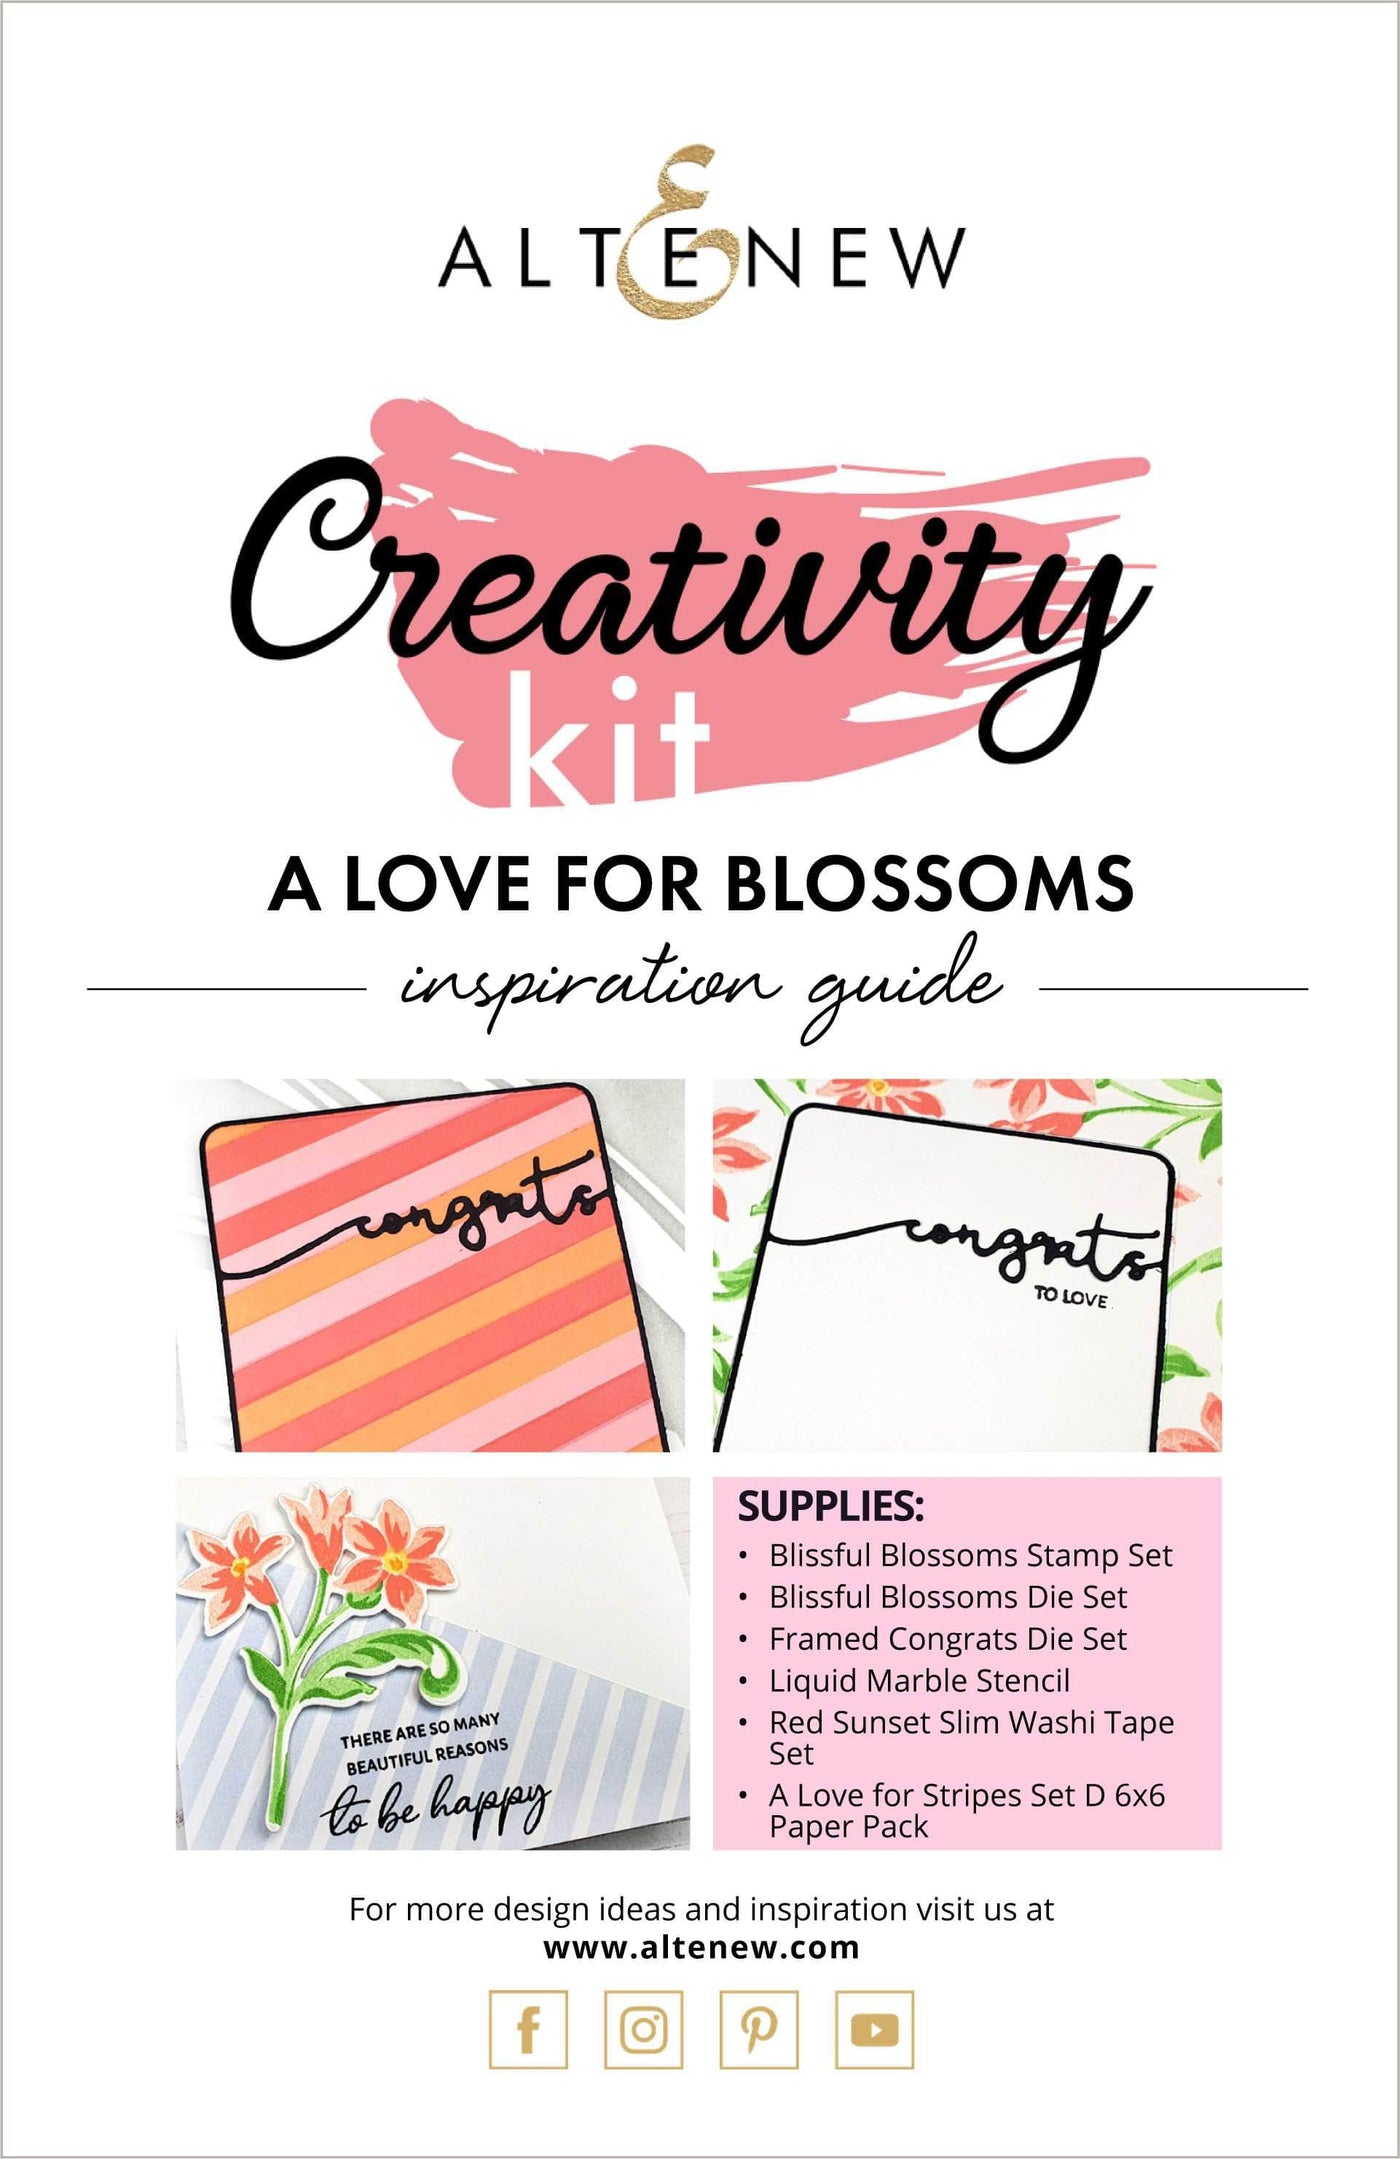 Printed Media A Love for Blossoms Creativity Cardmaking Kit Inspiration Guide